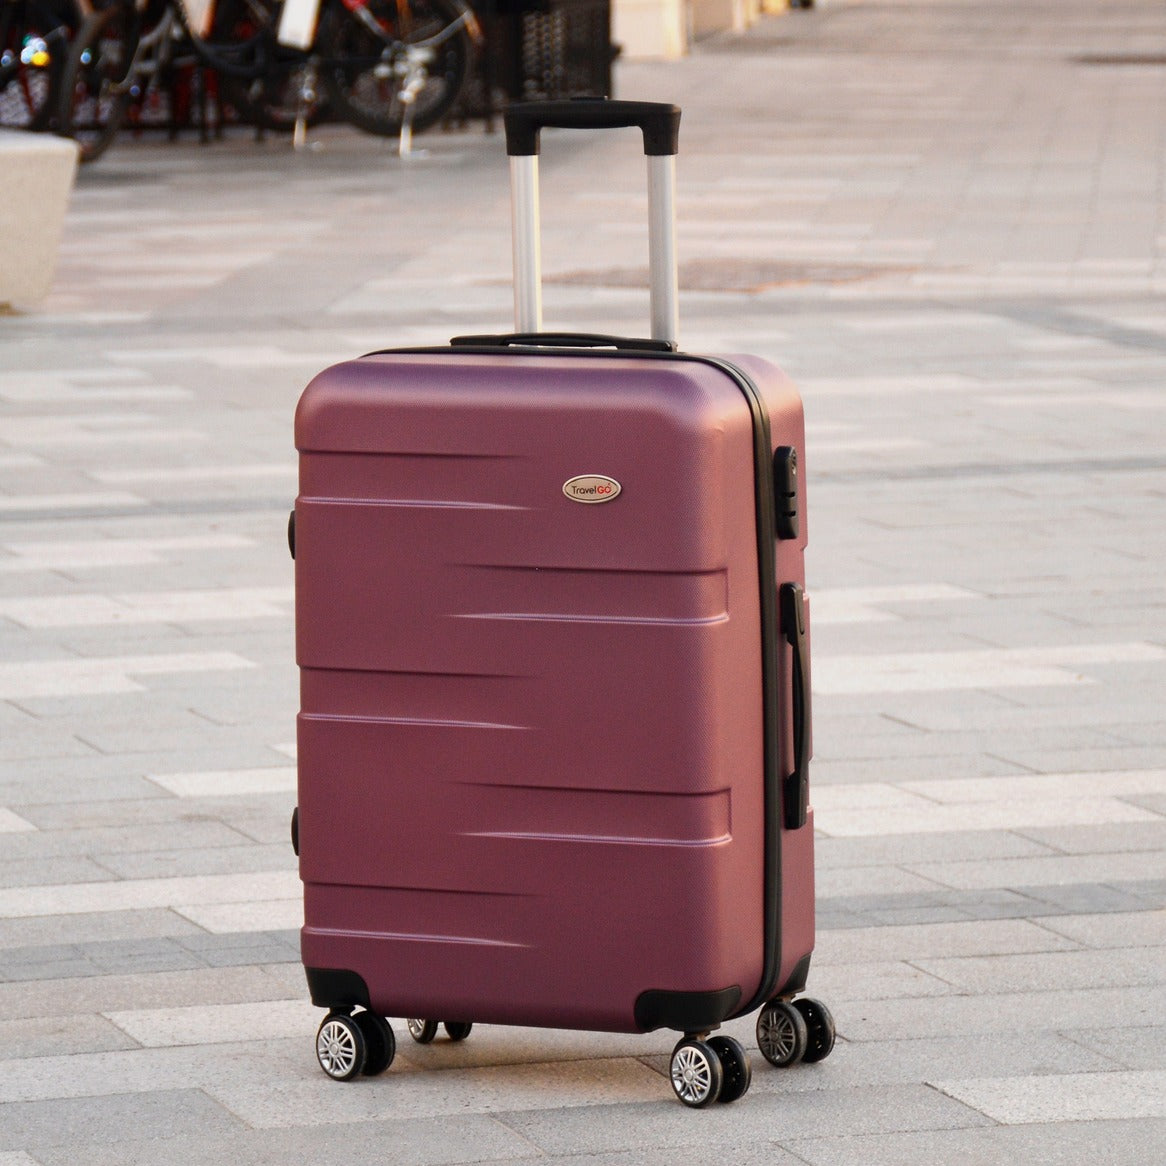 20" Purplish Red Colour JIAN ABS 559 Luggage Lightweight Hard Case Carry On Trolley Bag With Spinner Wheel Zaappy.com